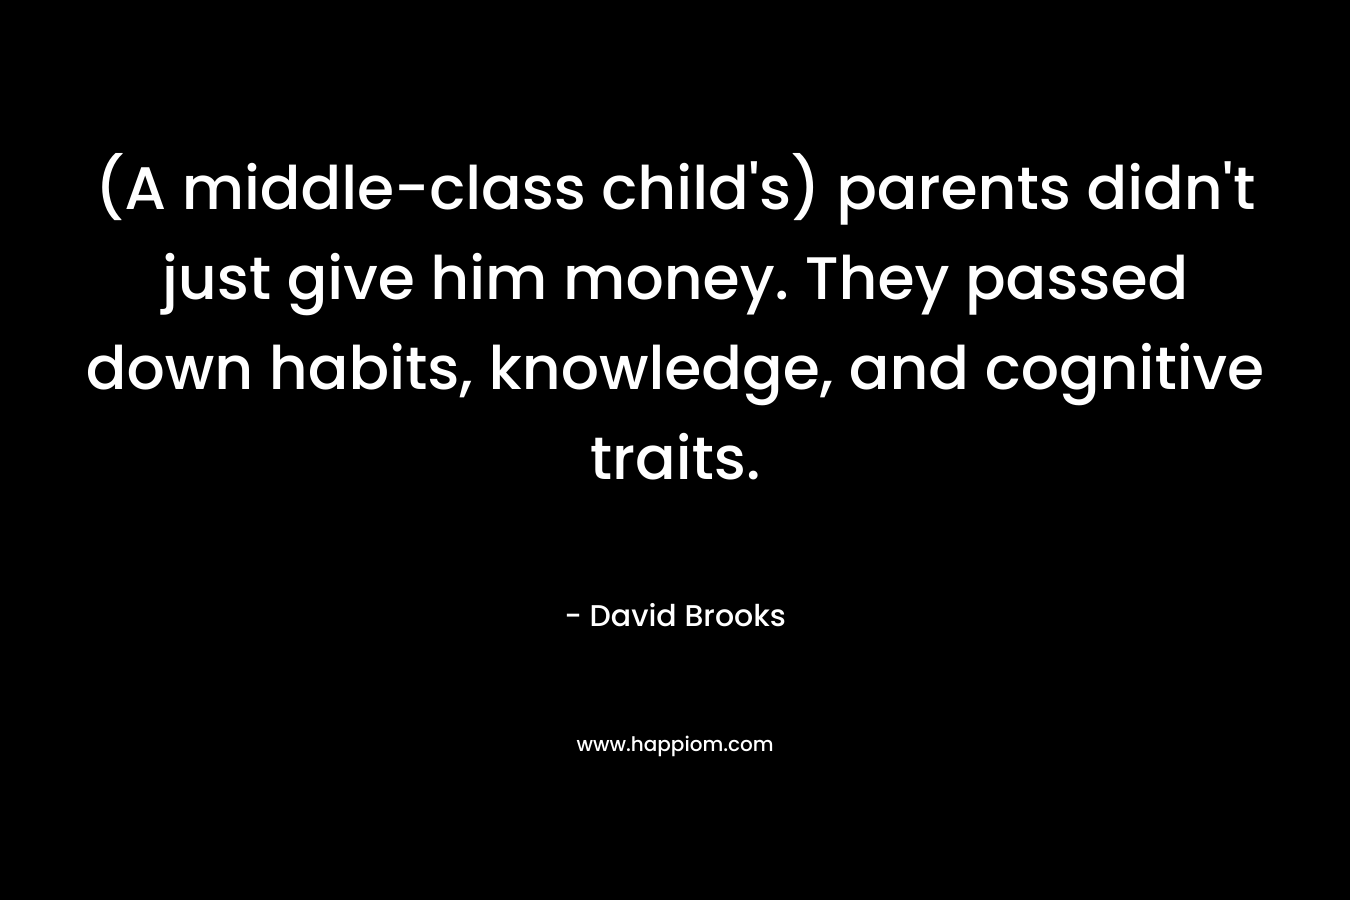 (A middle-class child’s) parents didn’t just give him money. They passed down habits, knowledge, and cognitive traits. – David Brooks